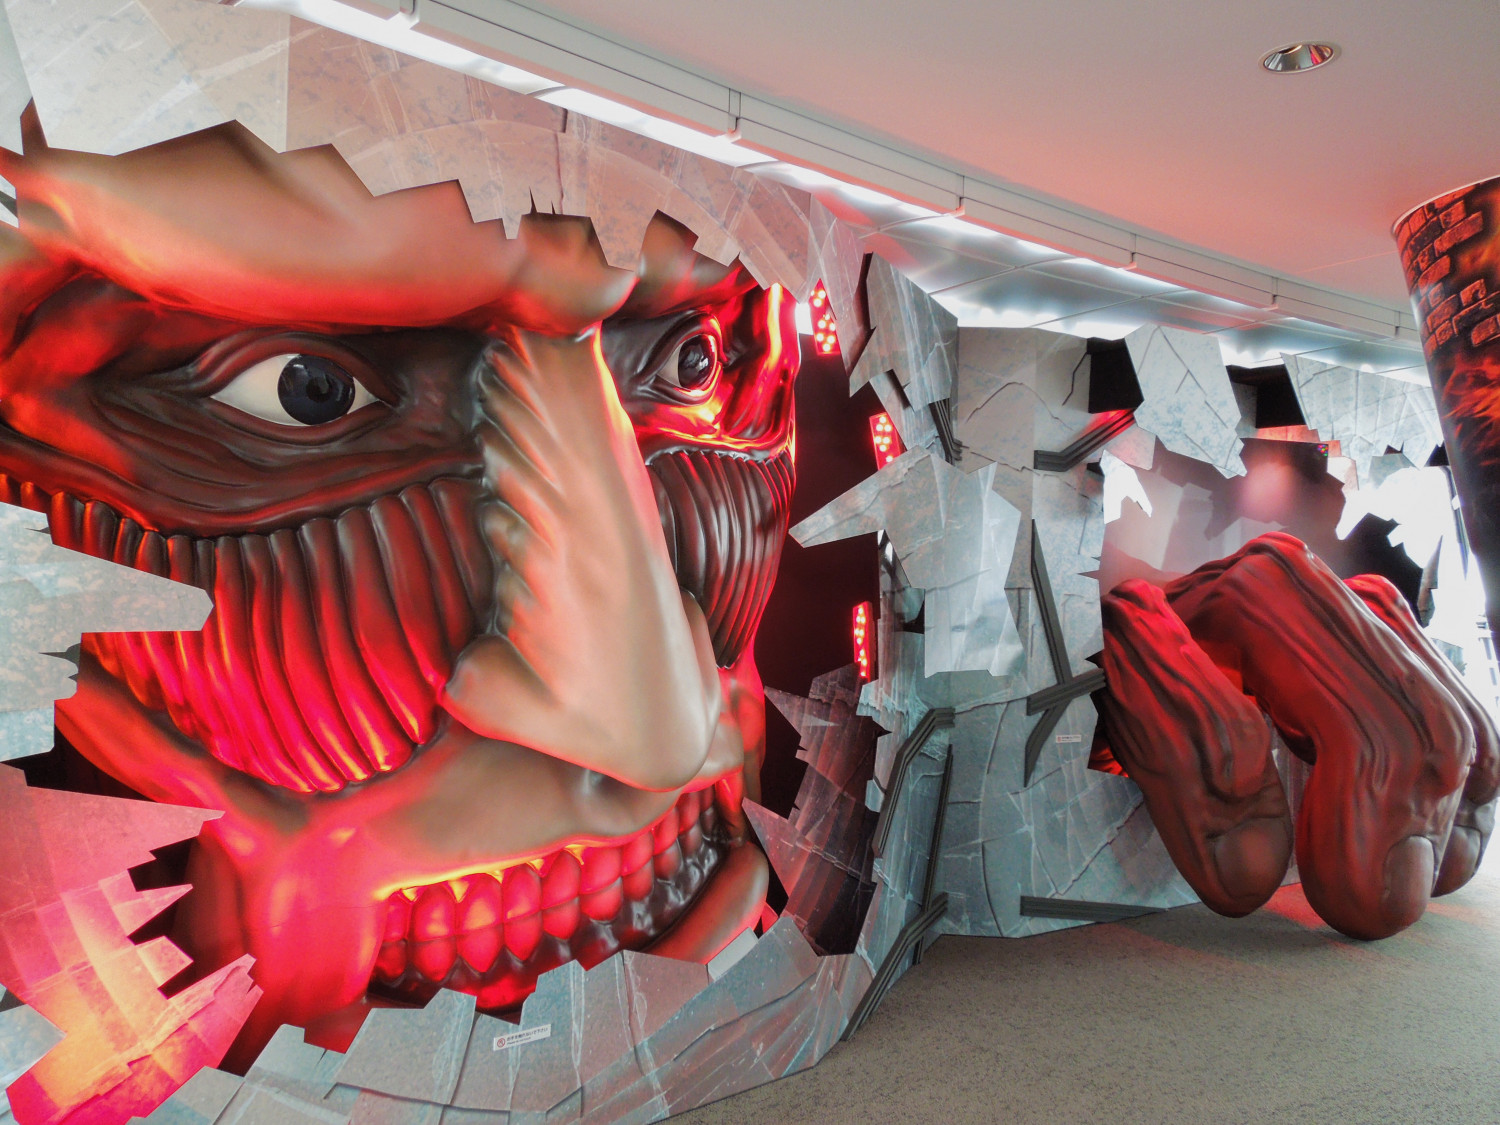 Attack on TOKYO SKYTREE : Highlights of Attack on Titan and TOKYO SKYTREE Collaboration Exhibition